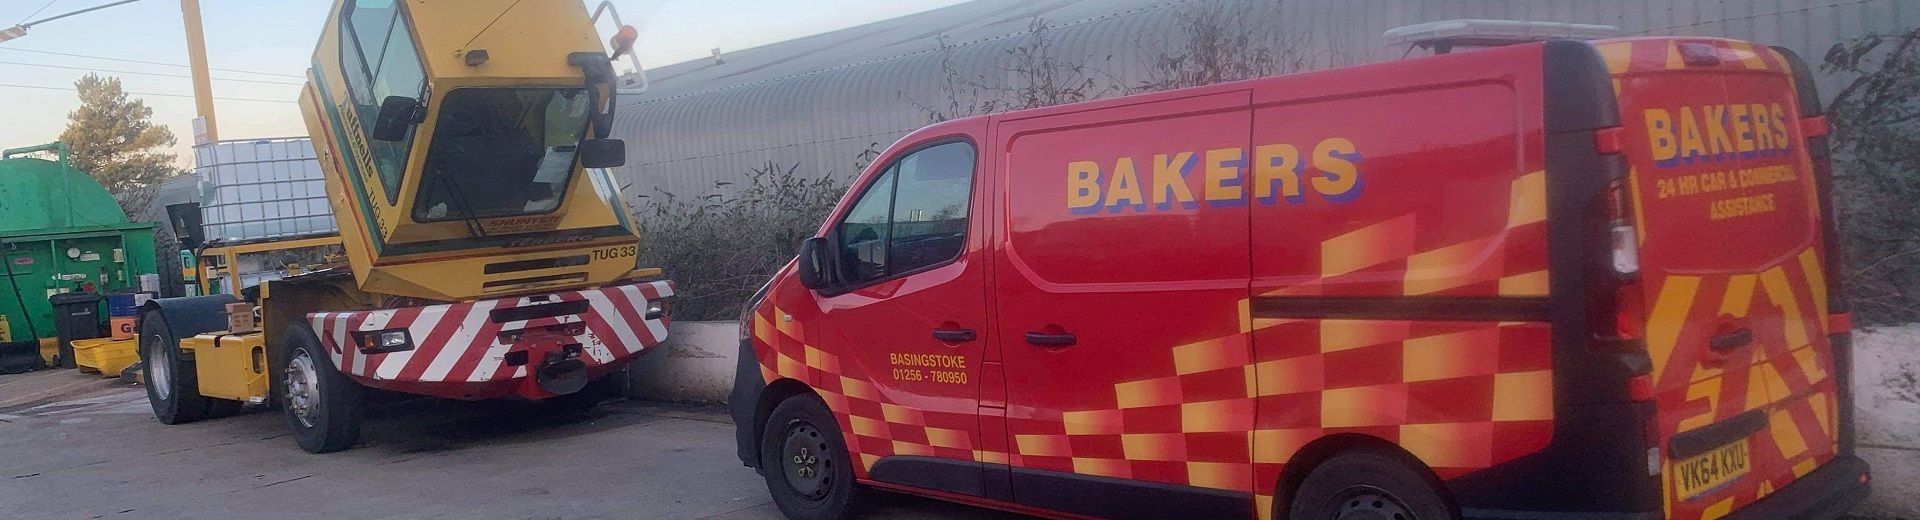 Bakers Recovery Commercial Service Vehicles for Basingstoke, Andover & Hampshire